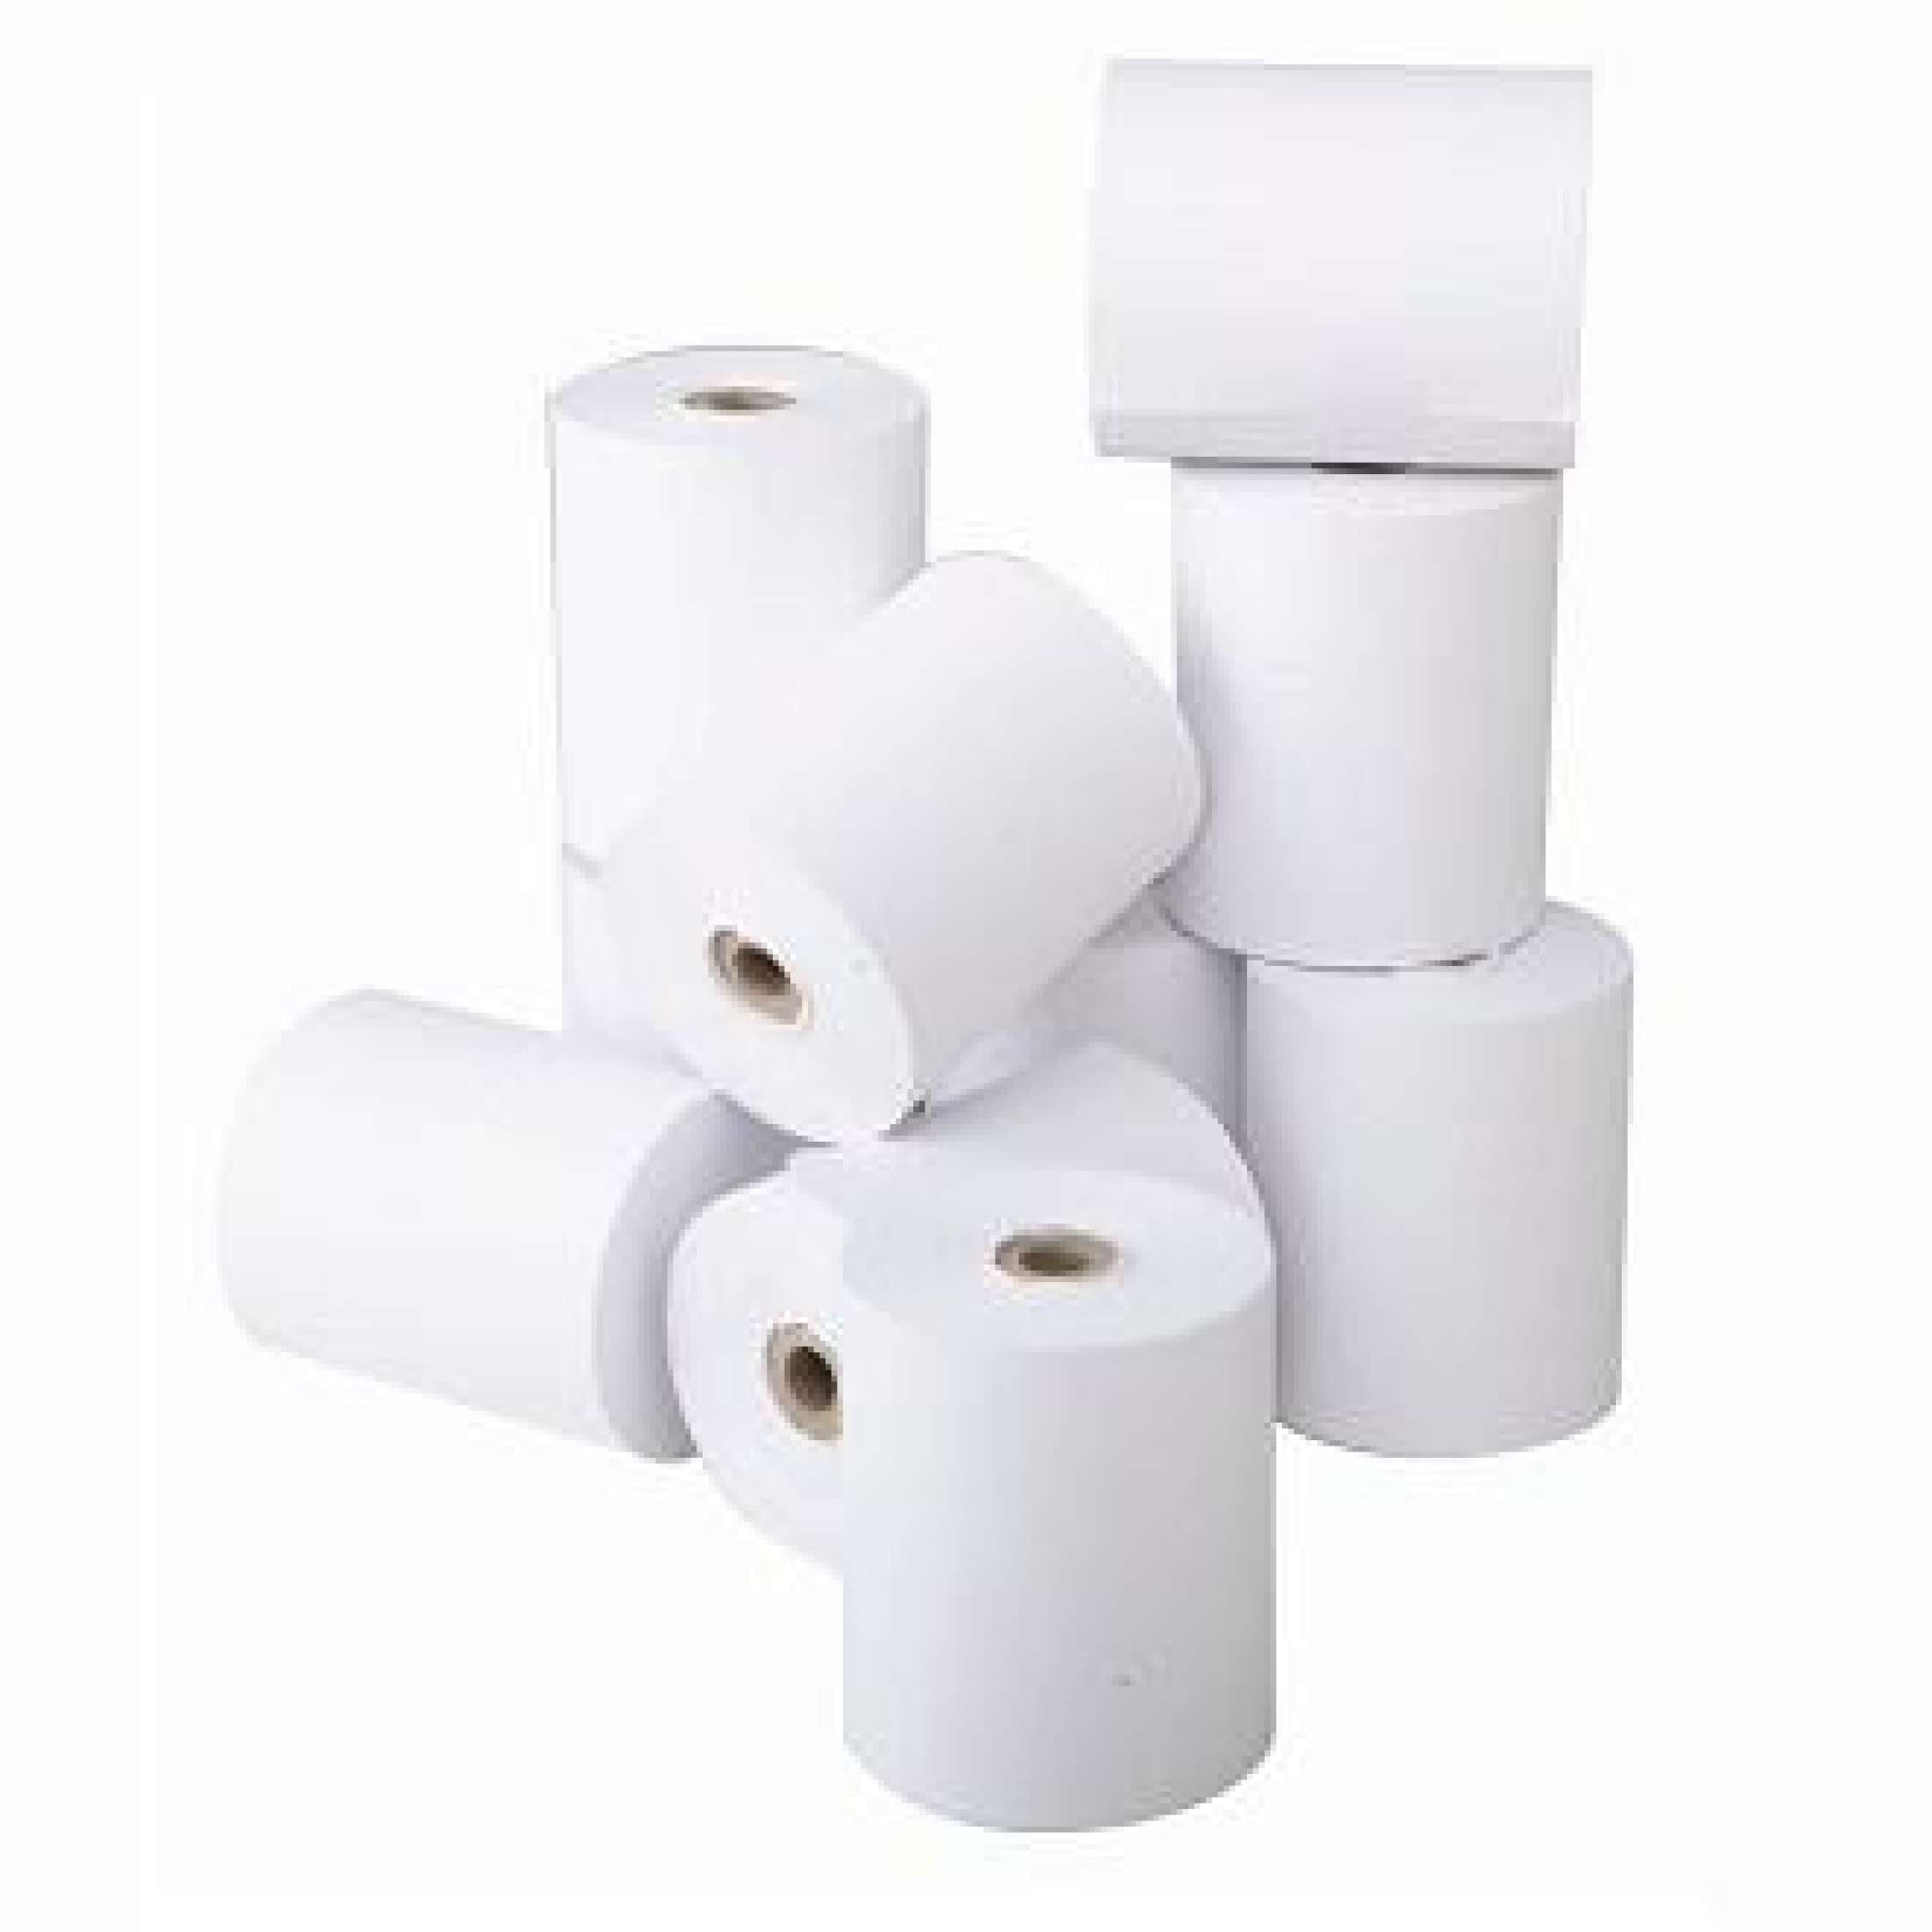 Thermal Roll 3X3 (65M) - White Single Piece